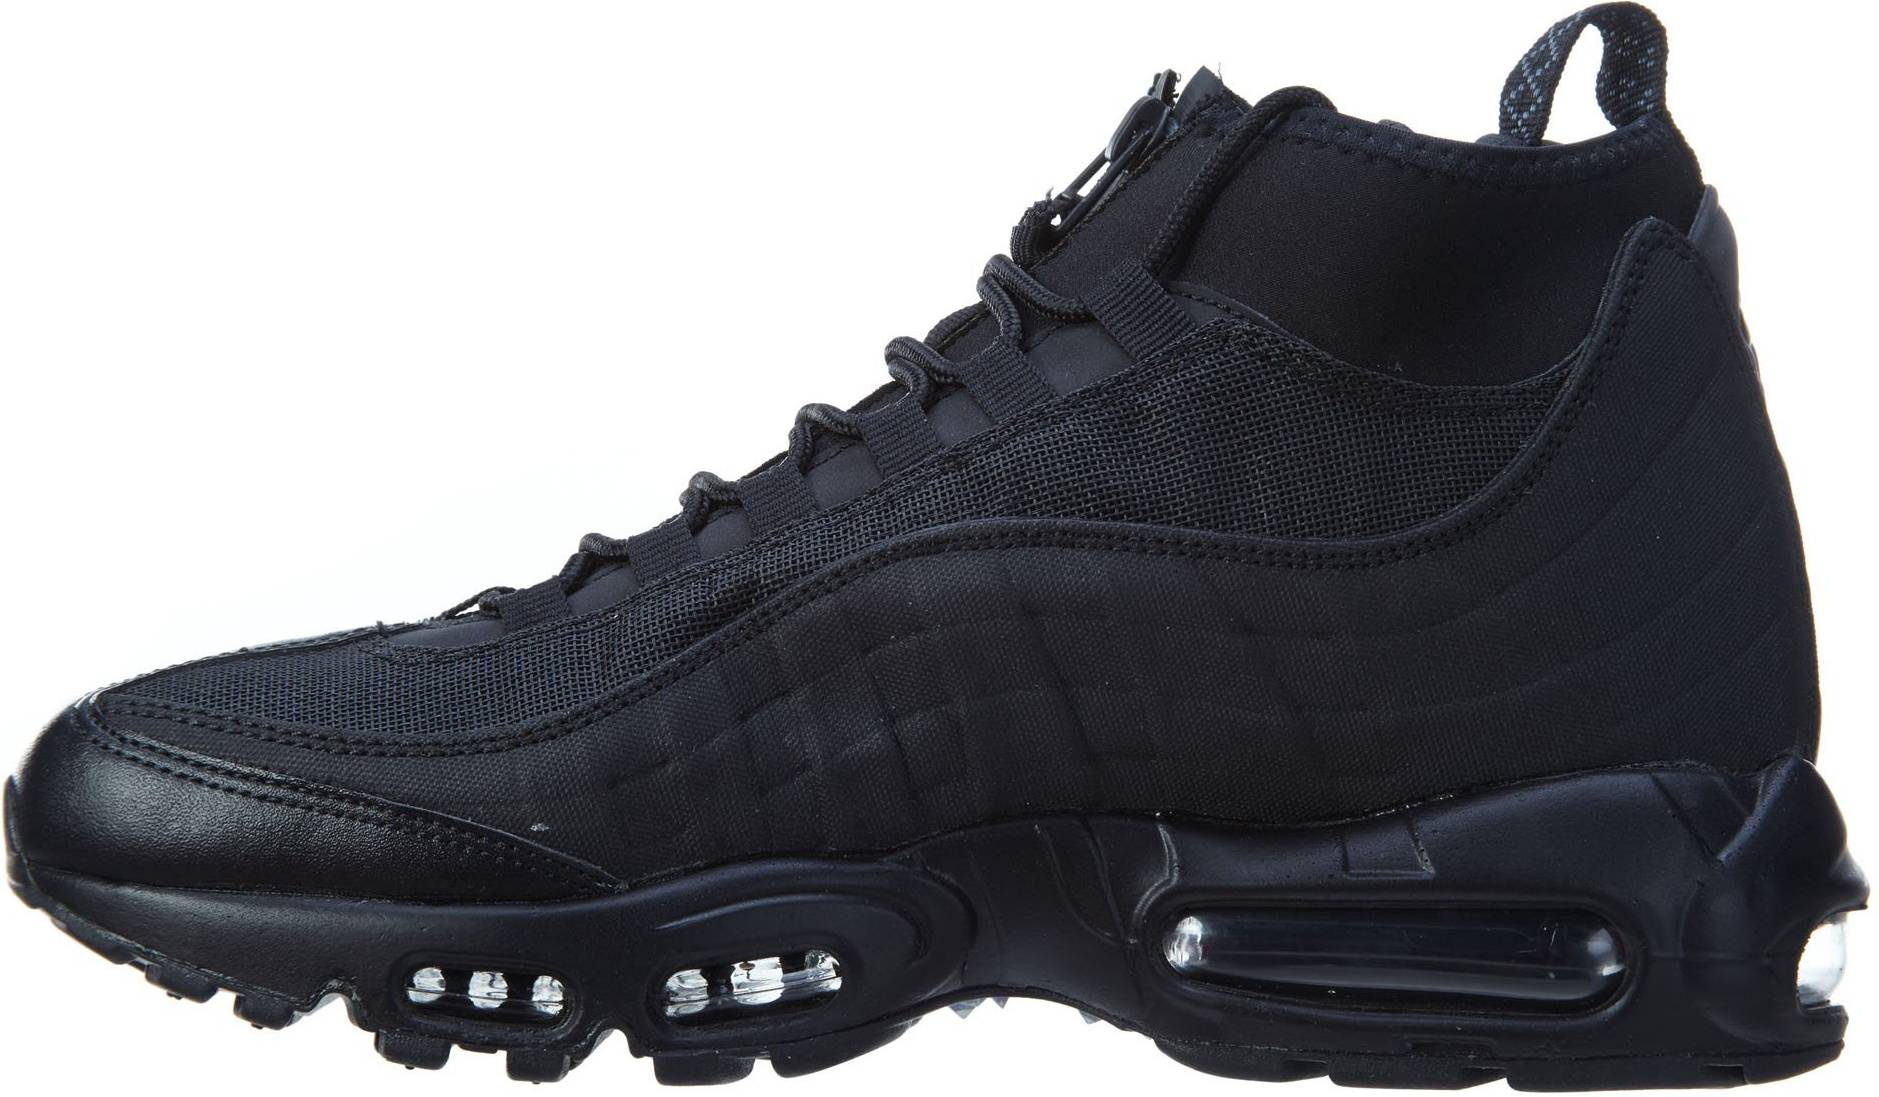 Nike Air Max 95 Sneaker Boot: Keep Your Feet Warm and Stylish